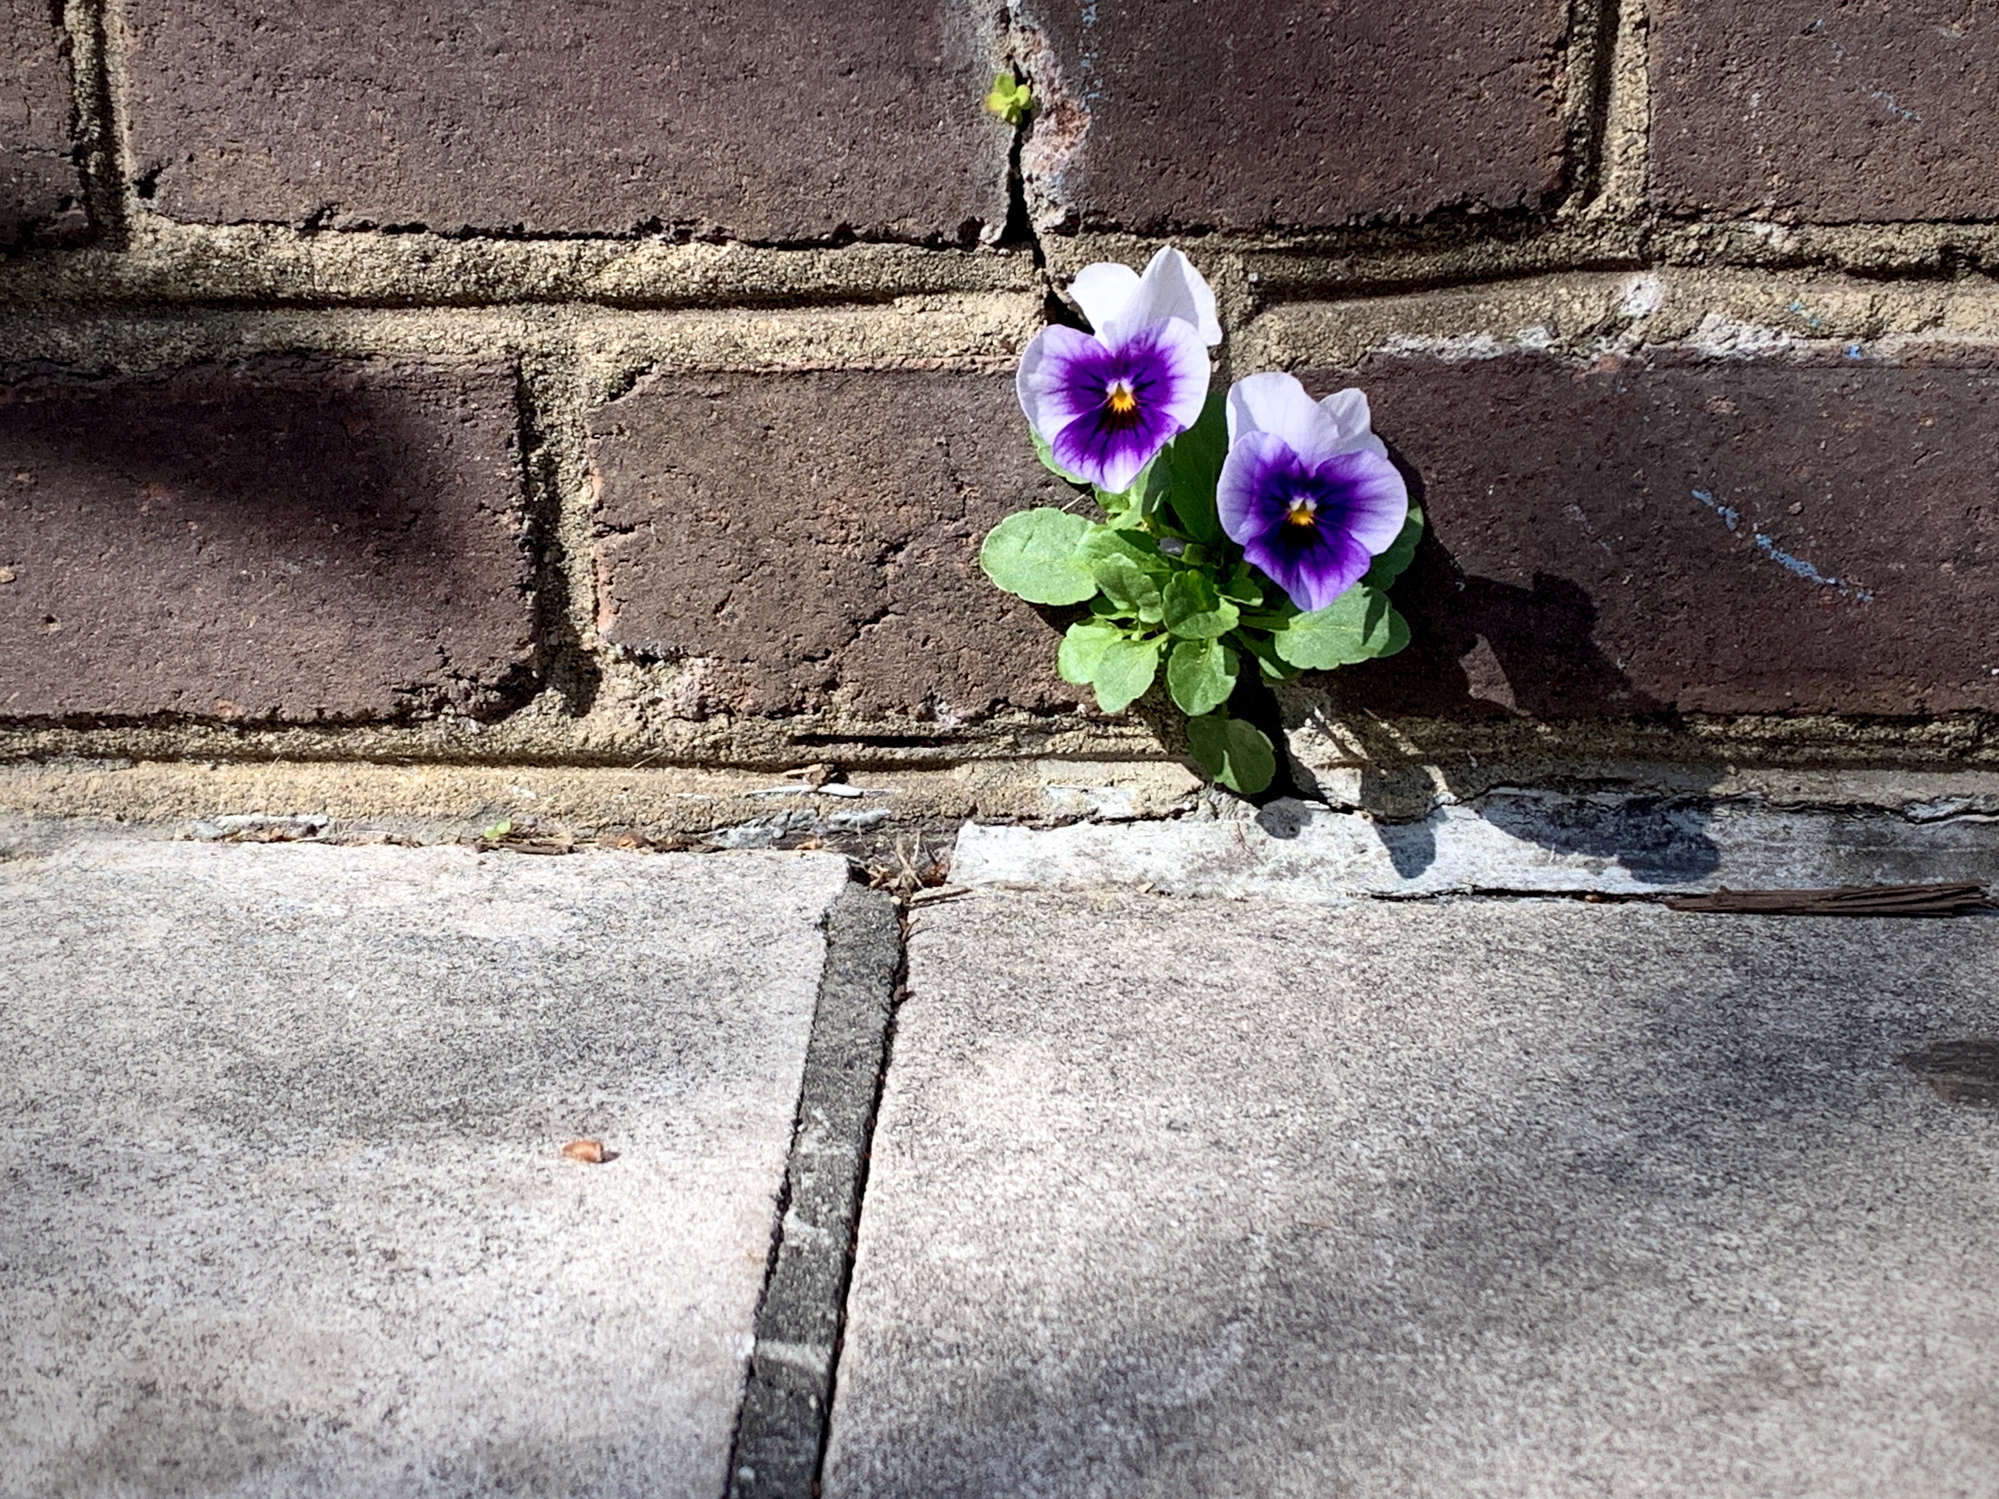 Pansies flower growing out of the brick wall on the sidewalk in historic Alexandria, Virginia.